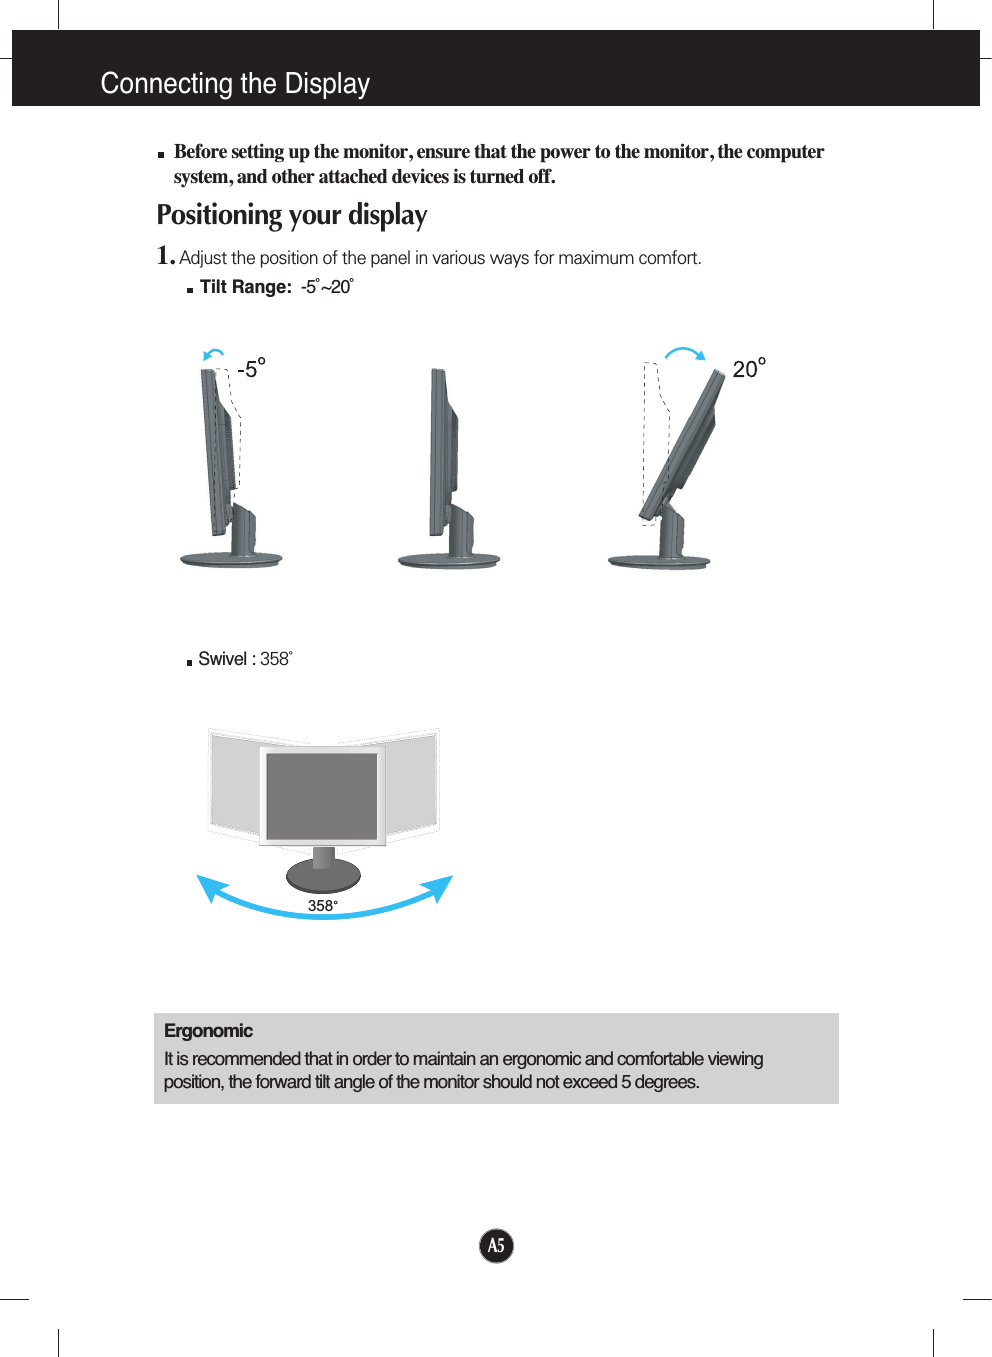 A5Connecting the DisplayBefore setting up the monitor, ensure that the power to the monitor, the computersystem, and other attached devices is turned off. Positioning your display1. Adjust the position of the panel in various ways for maximum comfort.Tilt Range: -5˚~20˚ ErgonomicIt is recommended that in order to maintain an ergonomic and comfortable viewingposition, the forward tilt angle of the monitor should not exceed 5 degrees.Swivel : 358˚   358